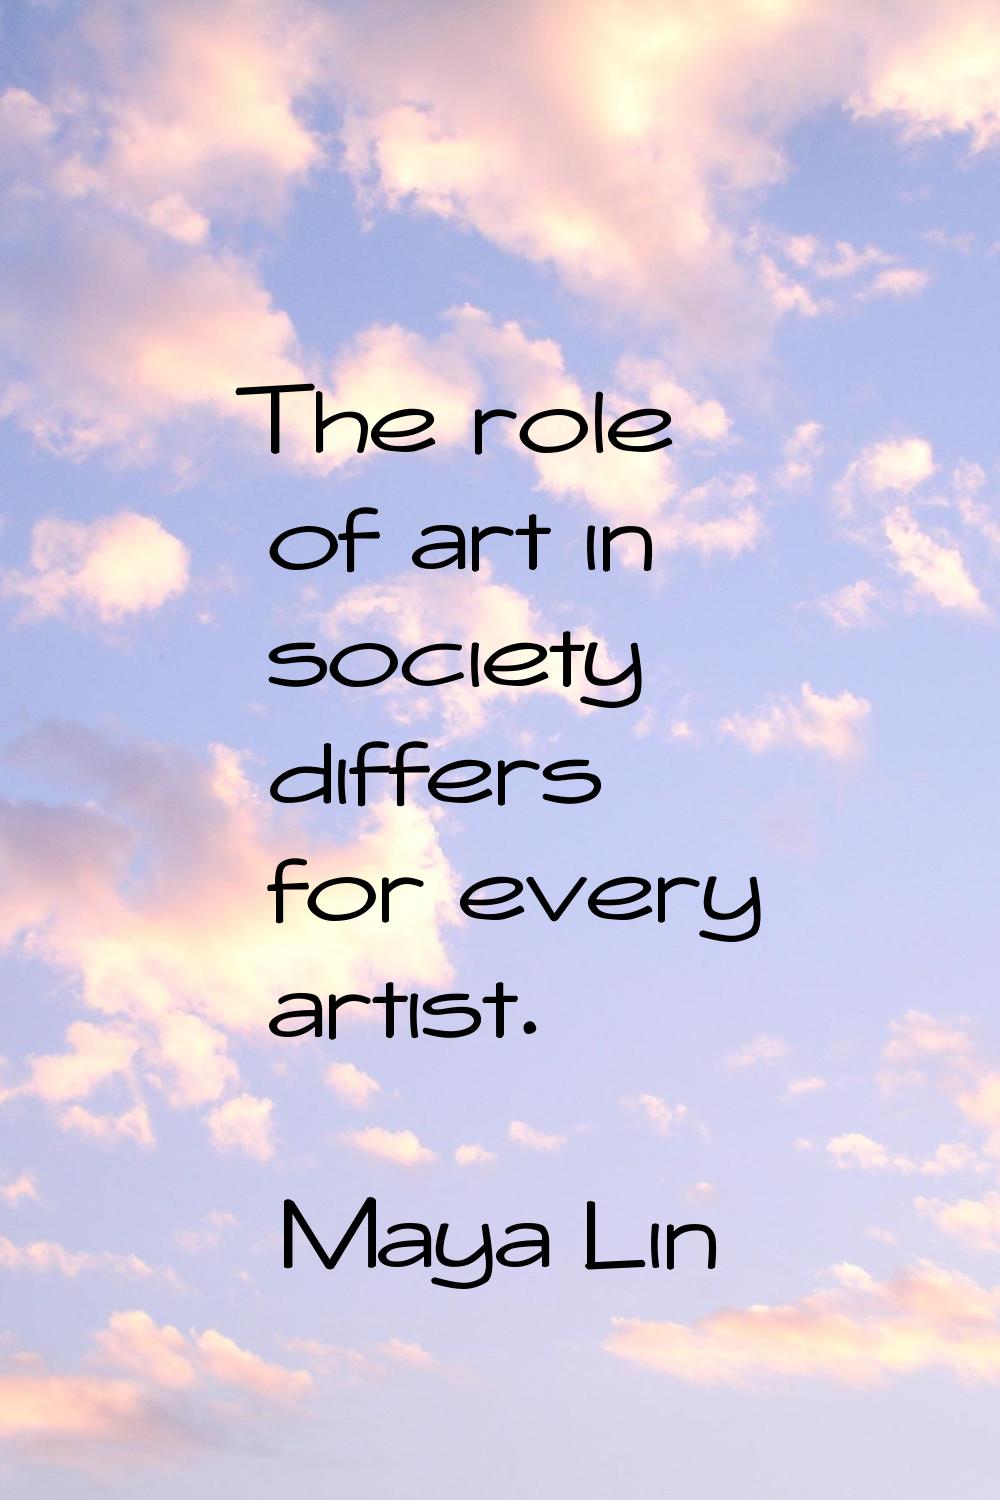 The role of art in society differs for every artist.